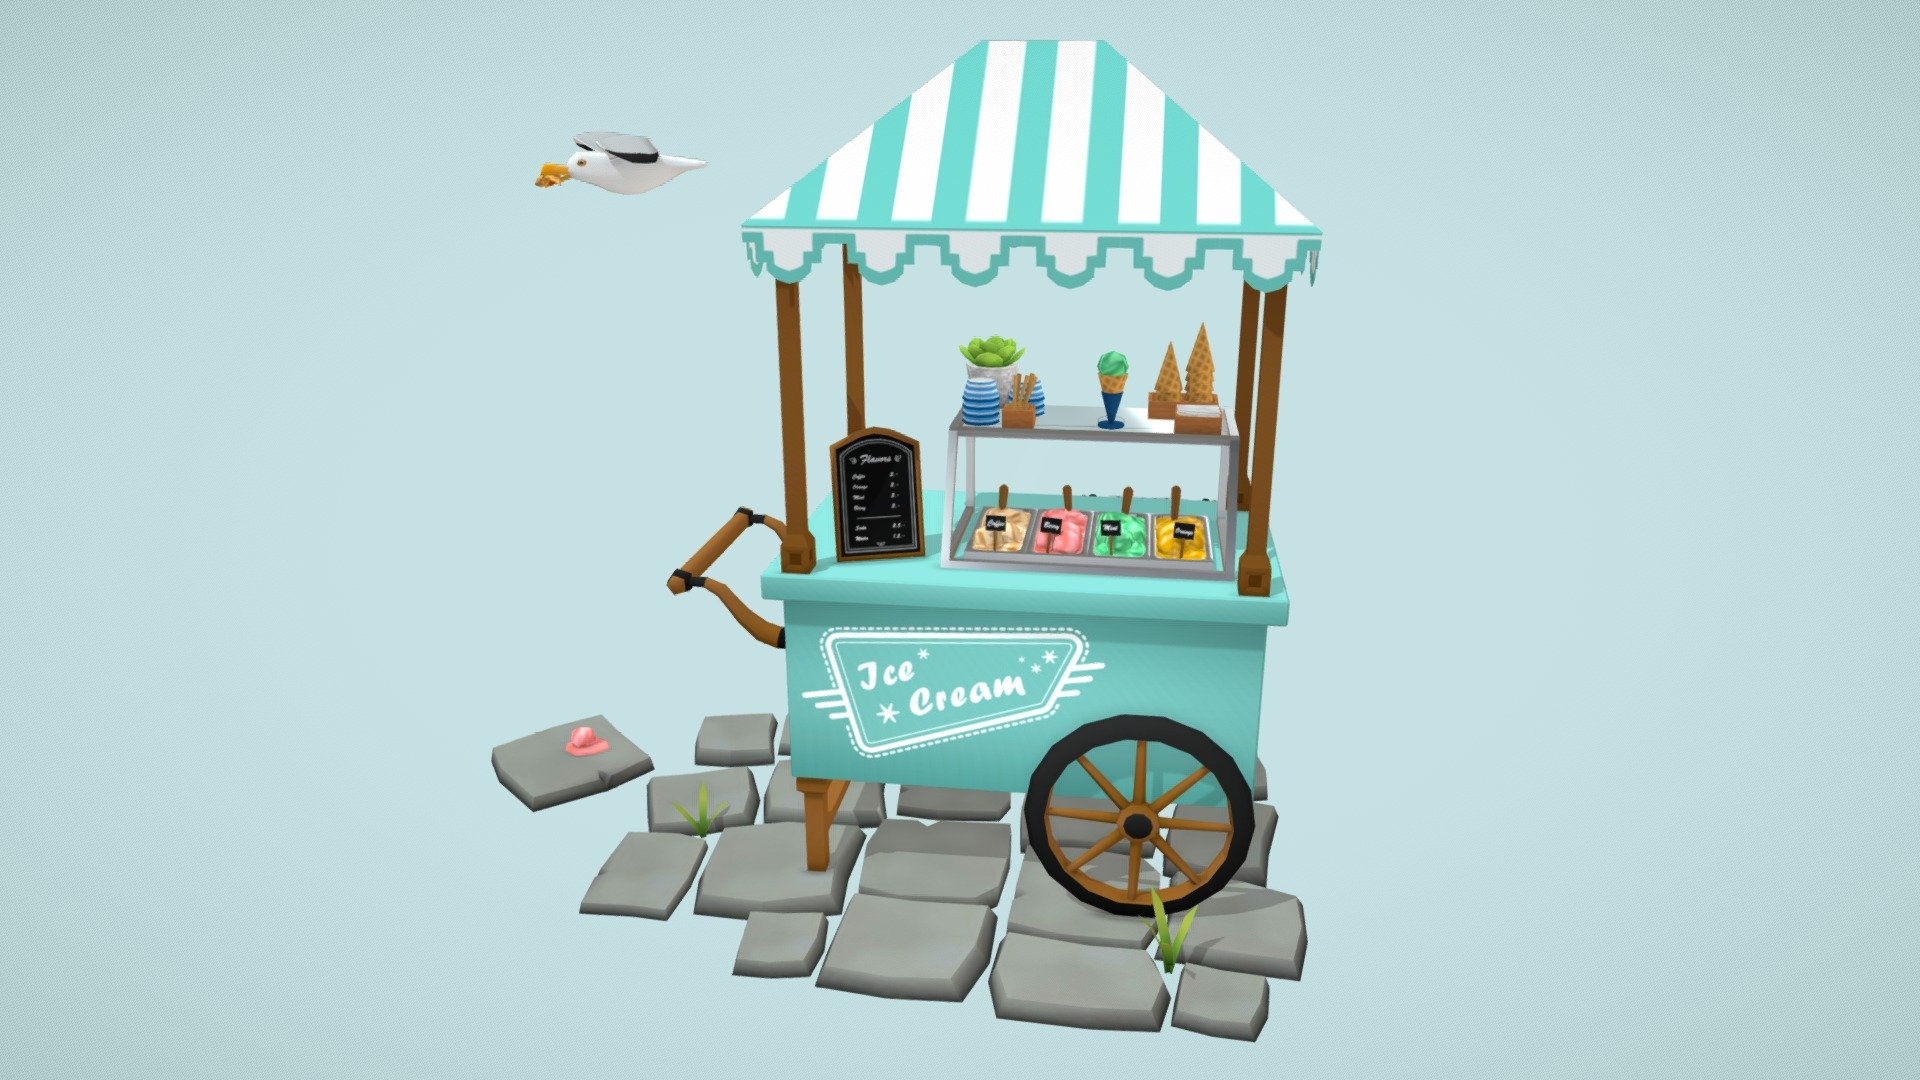 The infamous thief C. McGull strikes again!

I began this project with a simple ice cream cart, but then I felt like it could use a little more story :)

Software used:

-Blender
-Affinity Designer - Ice Cream Cart - 3D model by Elizabet Halatyan (@ElizabetHalatyan) 3d model